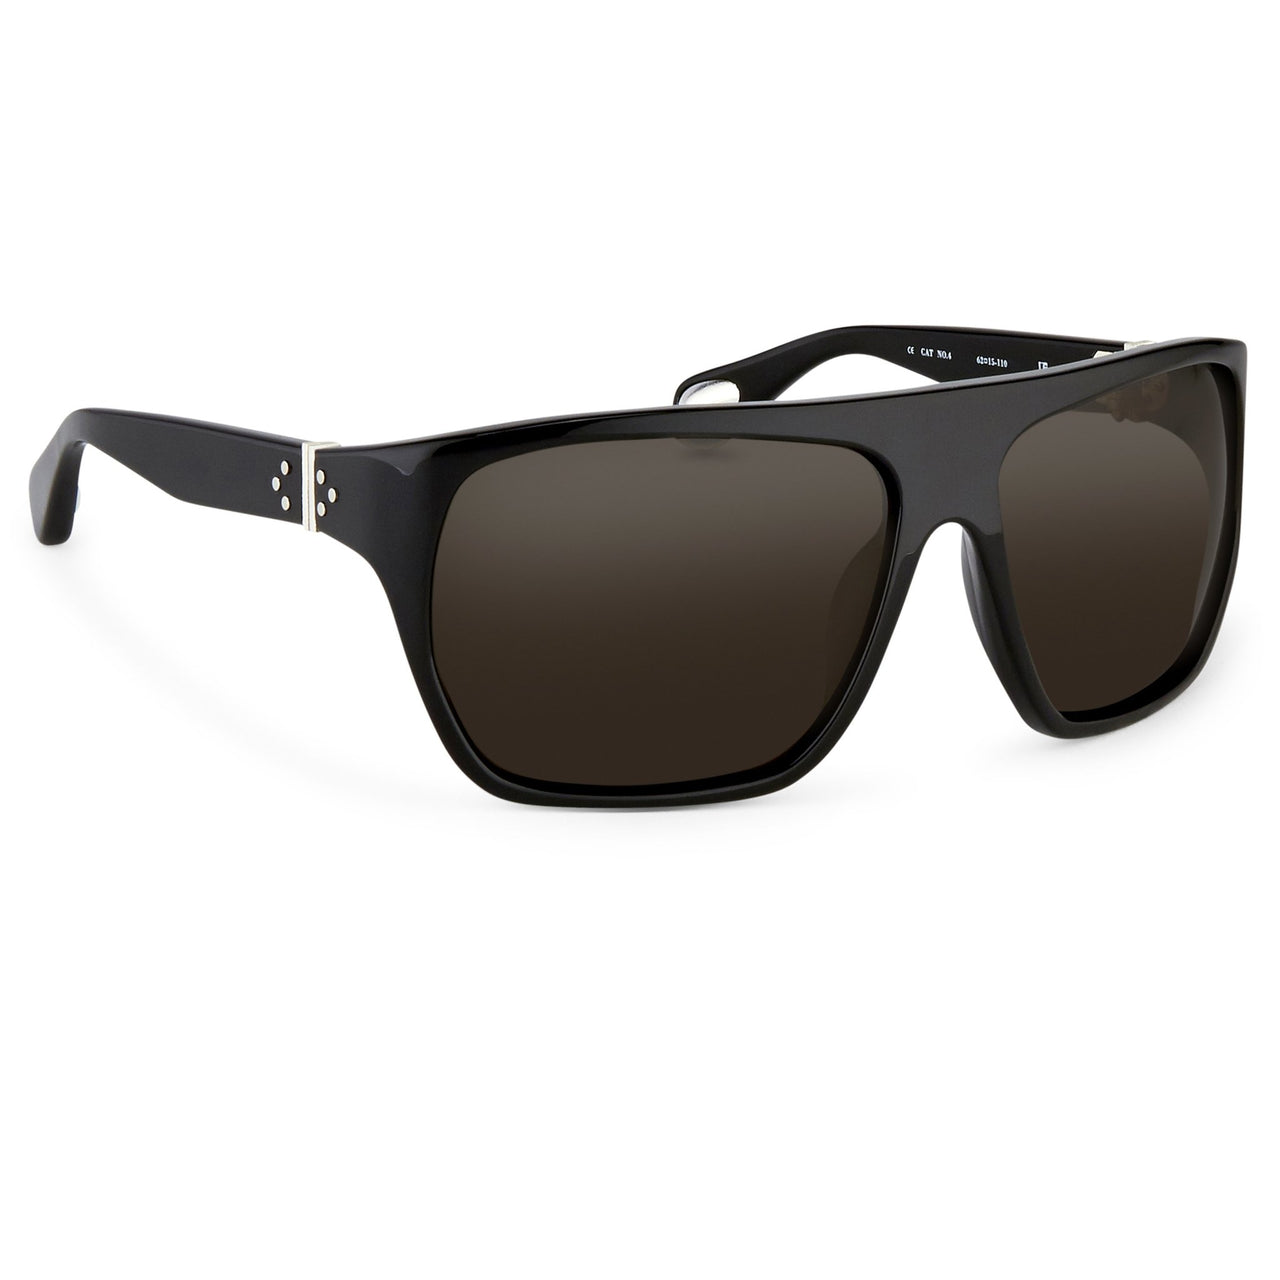 Ann Demeulemeester Sunglasses Oversized Black 925 Silver with Grey Lenses CAT3 AD31C1SUN - Watches & Crystals